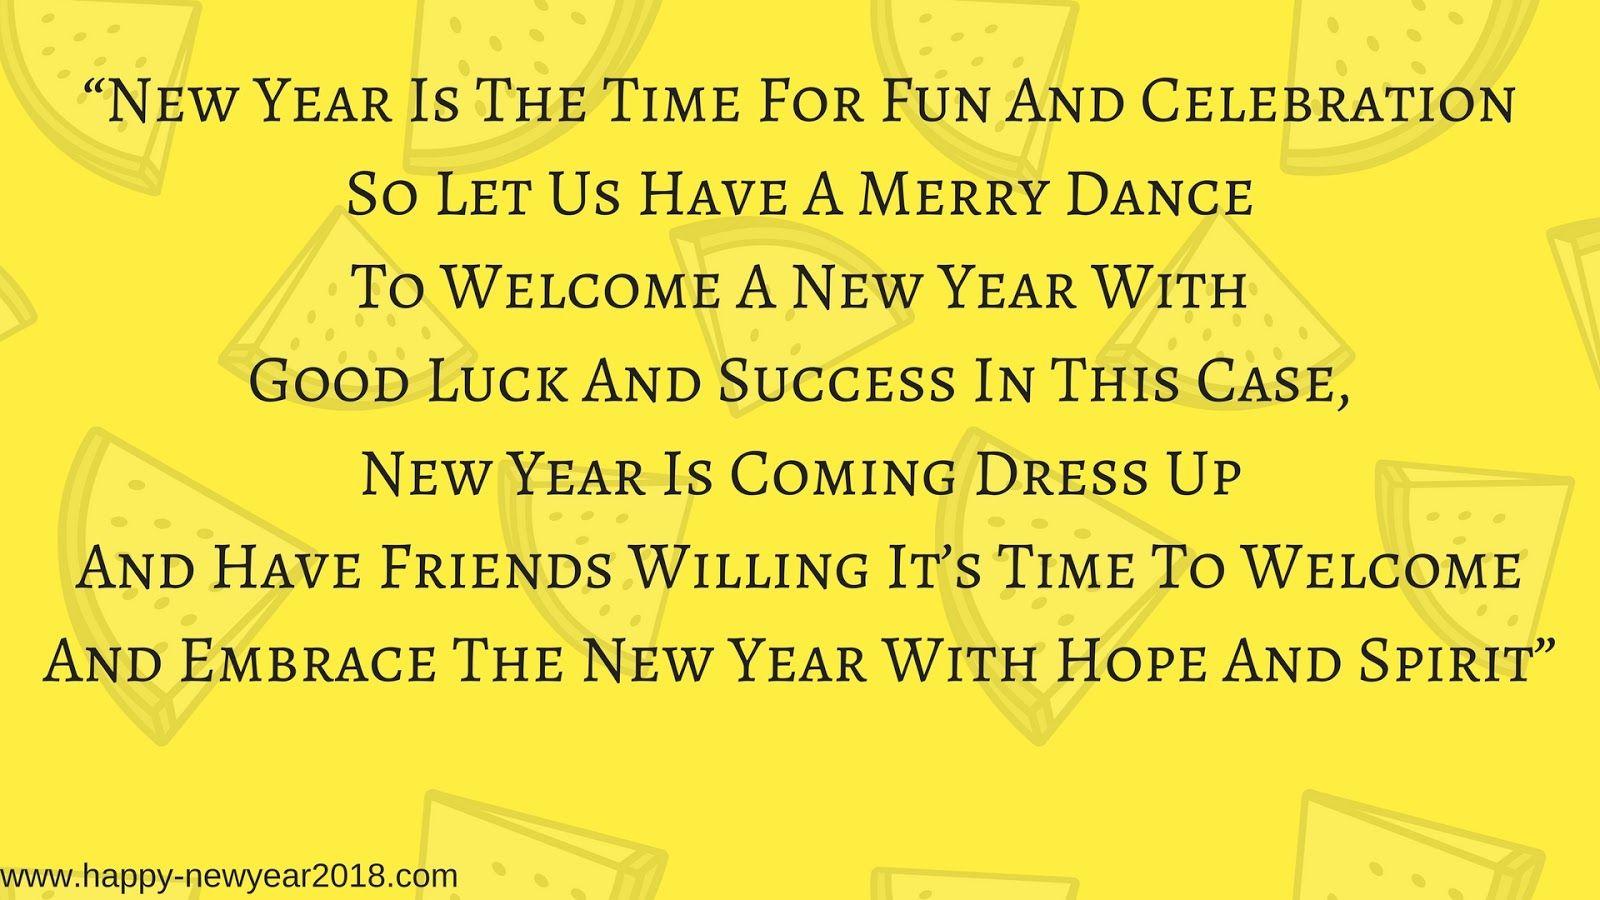 Best Happy New Year 2018 Image, Wishes, Quotes, Greetings